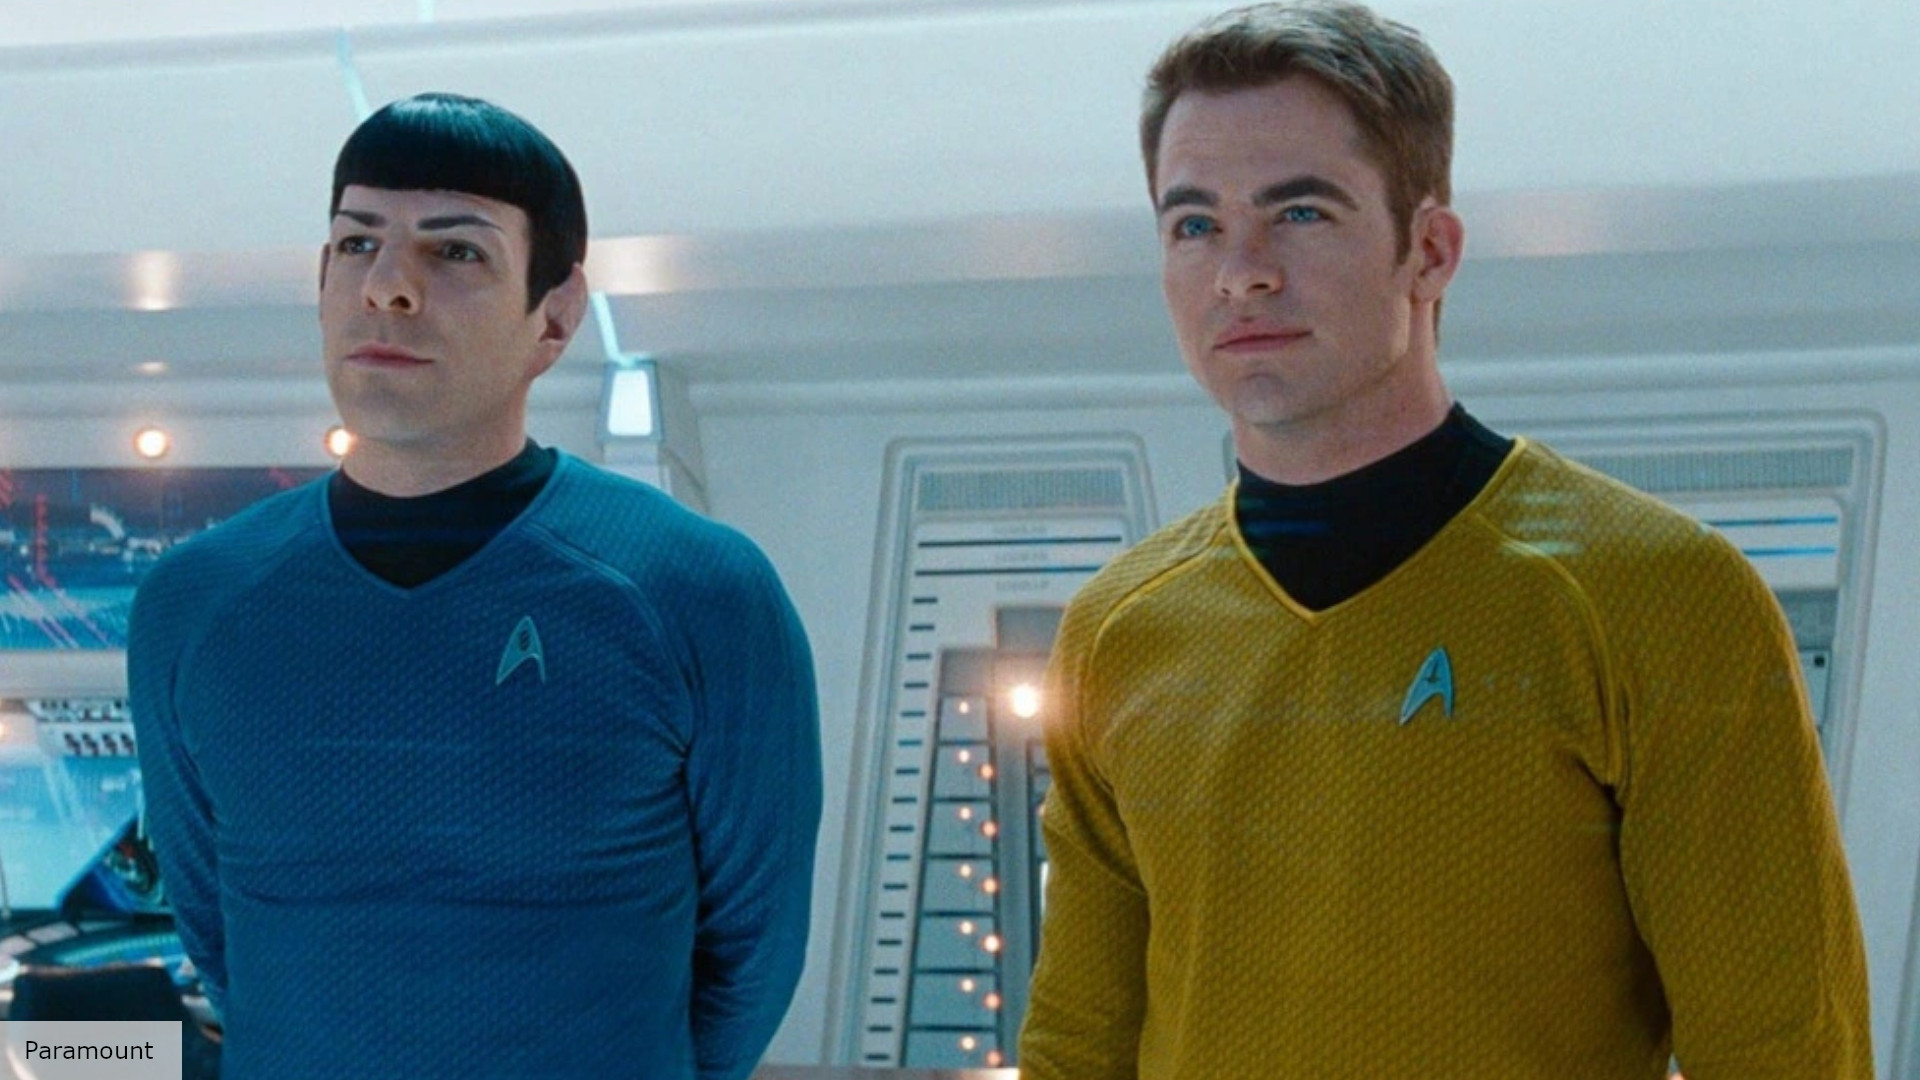 Star Trek 4 release date speculation, cast, plot and more news The